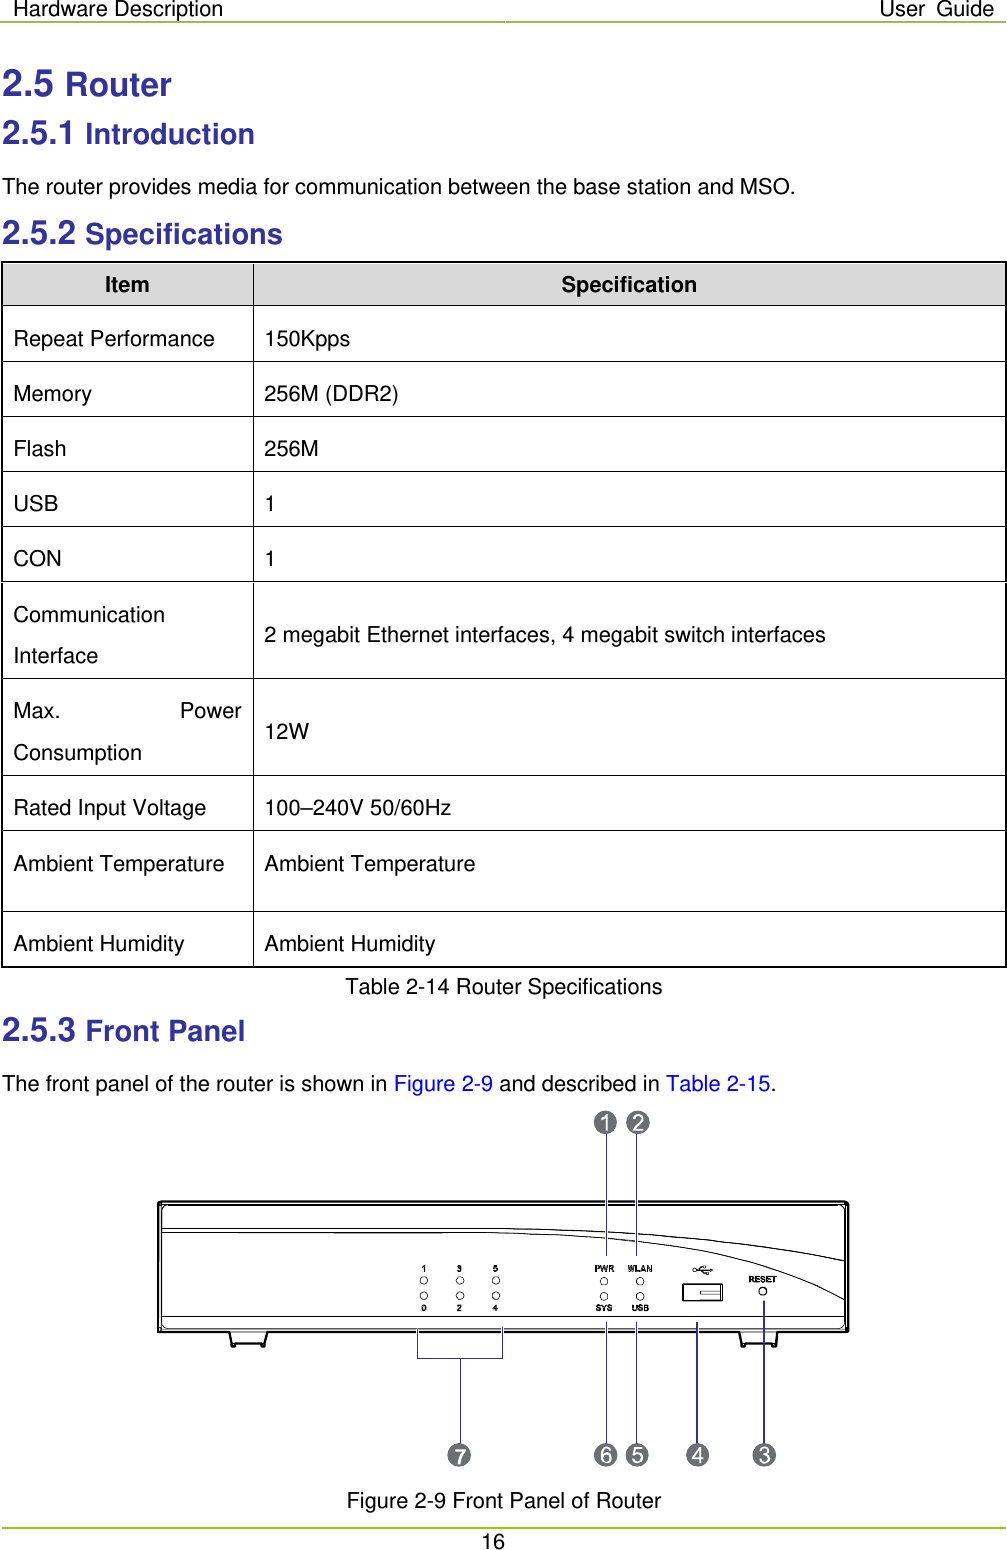 Hardware Description User Guide  16  2.5 Router 2.5.1 Introduction The router provides media for communication between the base station and MSO.   2.5.2 Specifications Item Specification Repeat Performance 150Kpps Memory 256M (DDR2) Flash 256M USB  1 CON  1 Communication Interface 2 megabit Ethernet interfaces, 4 megabit switch interfaces Max. Power Consumption 12W Rated Input Voltage 100–240V 50/60Hz Ambient Temperature  Ambient Temperature  Ambient Humidity Ambient Humidity Table 2-14 Router Specifications 2.5.3 Front Panel The front panel of the router is shown in Figure 2-9 and described in Table 2-15.  Figure 2-9 Front Panel of Router 